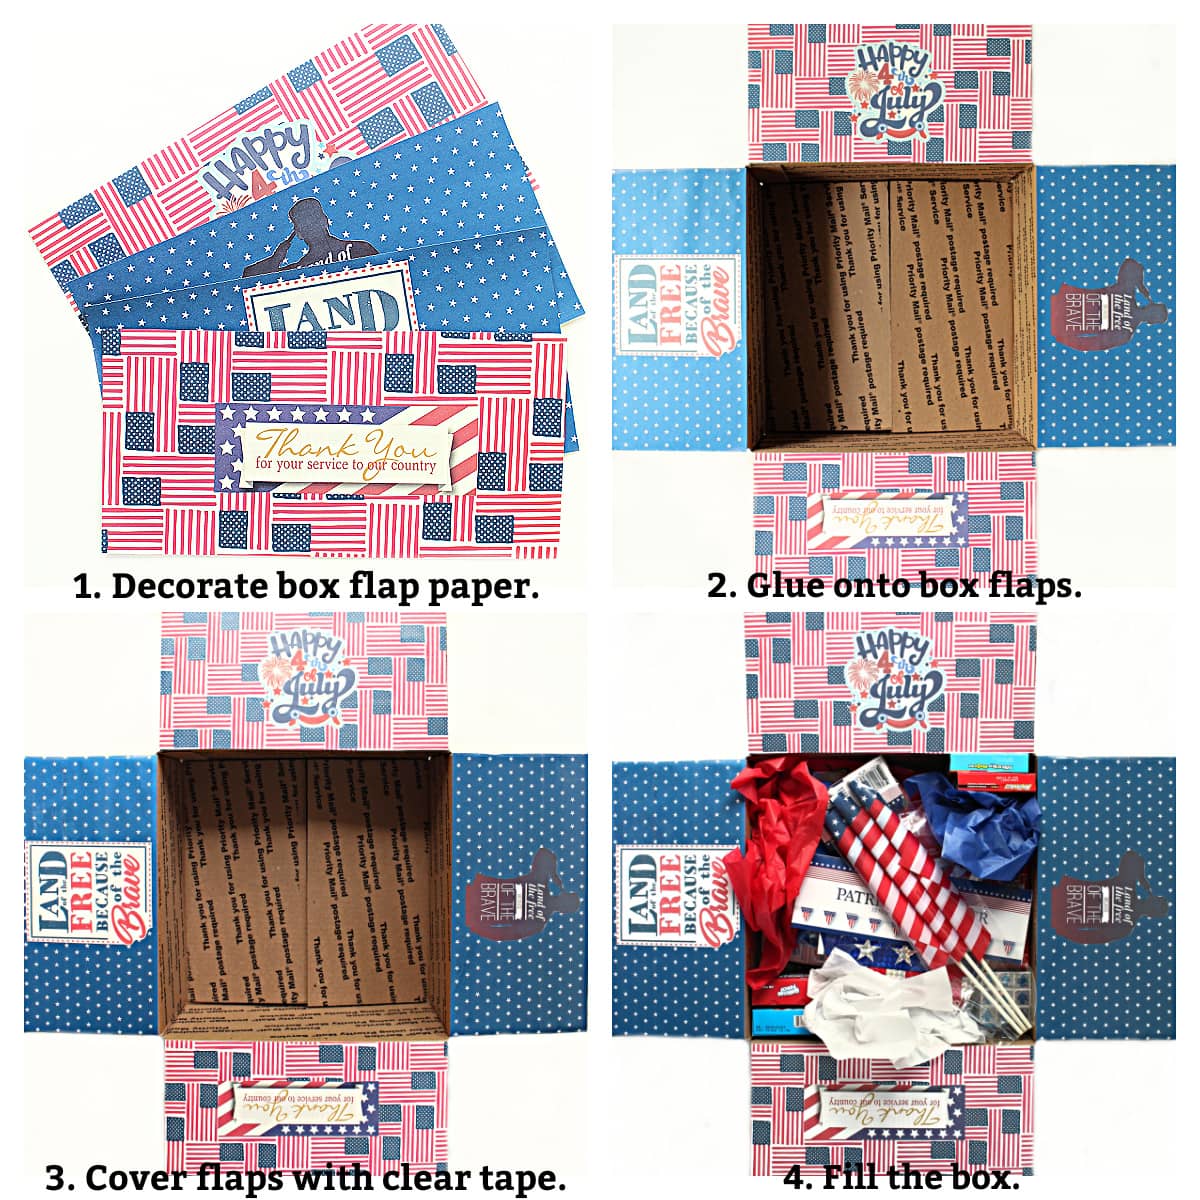 Instructions labeled: decorate box flap paper, glue onto box, cover with tape, fill box.